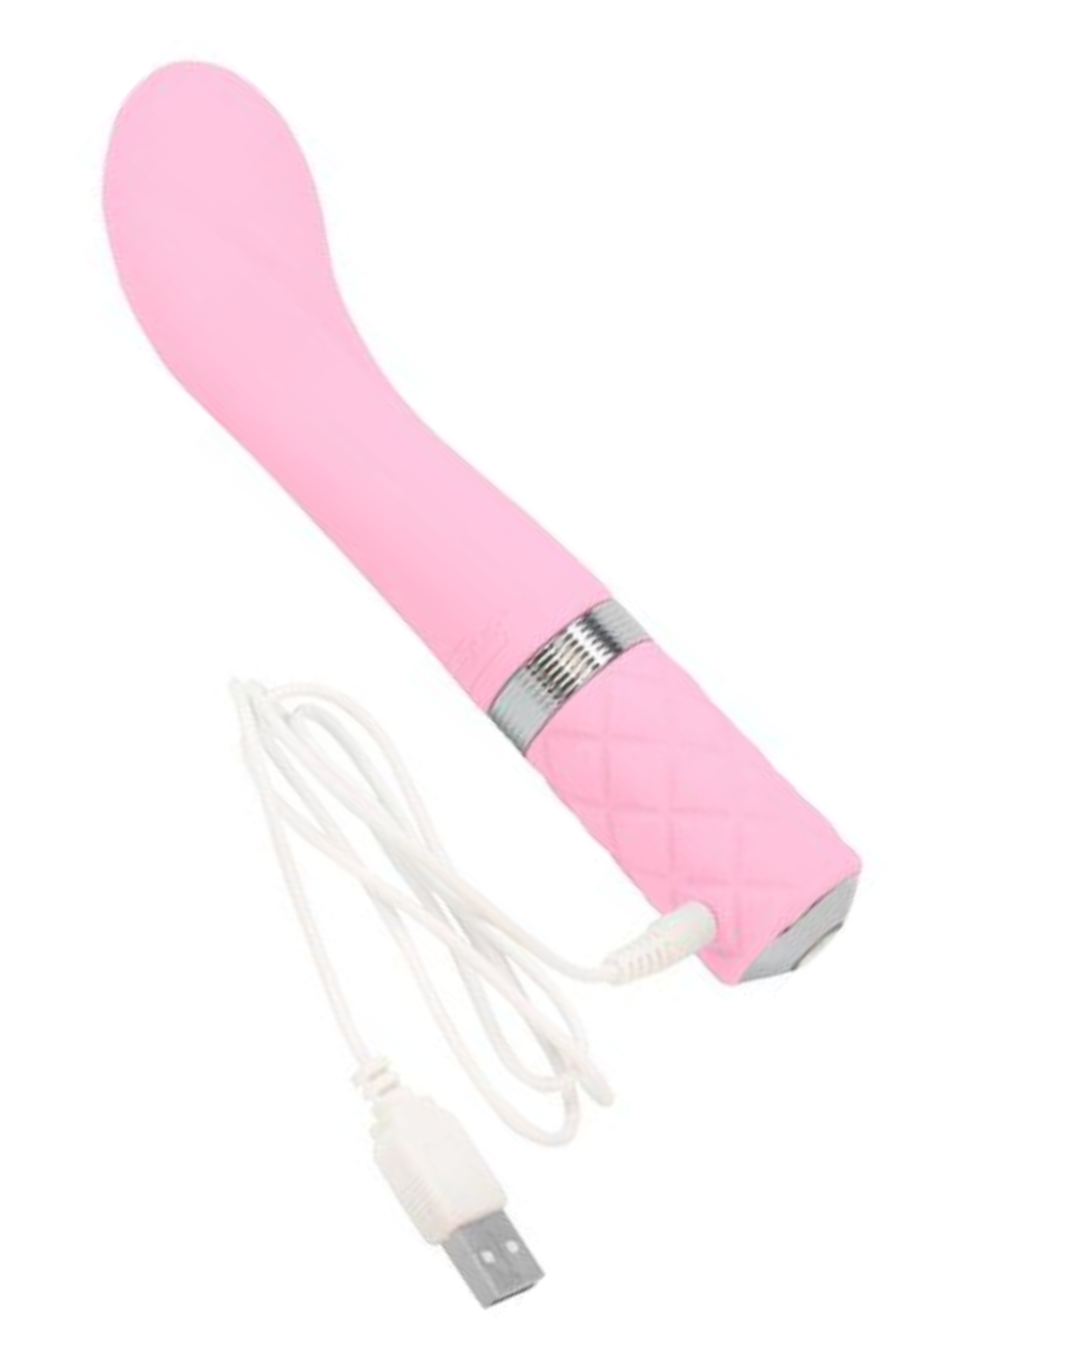 Pillow Talk Sassy G-spot Vibrator by BMS - Pink with charging cord